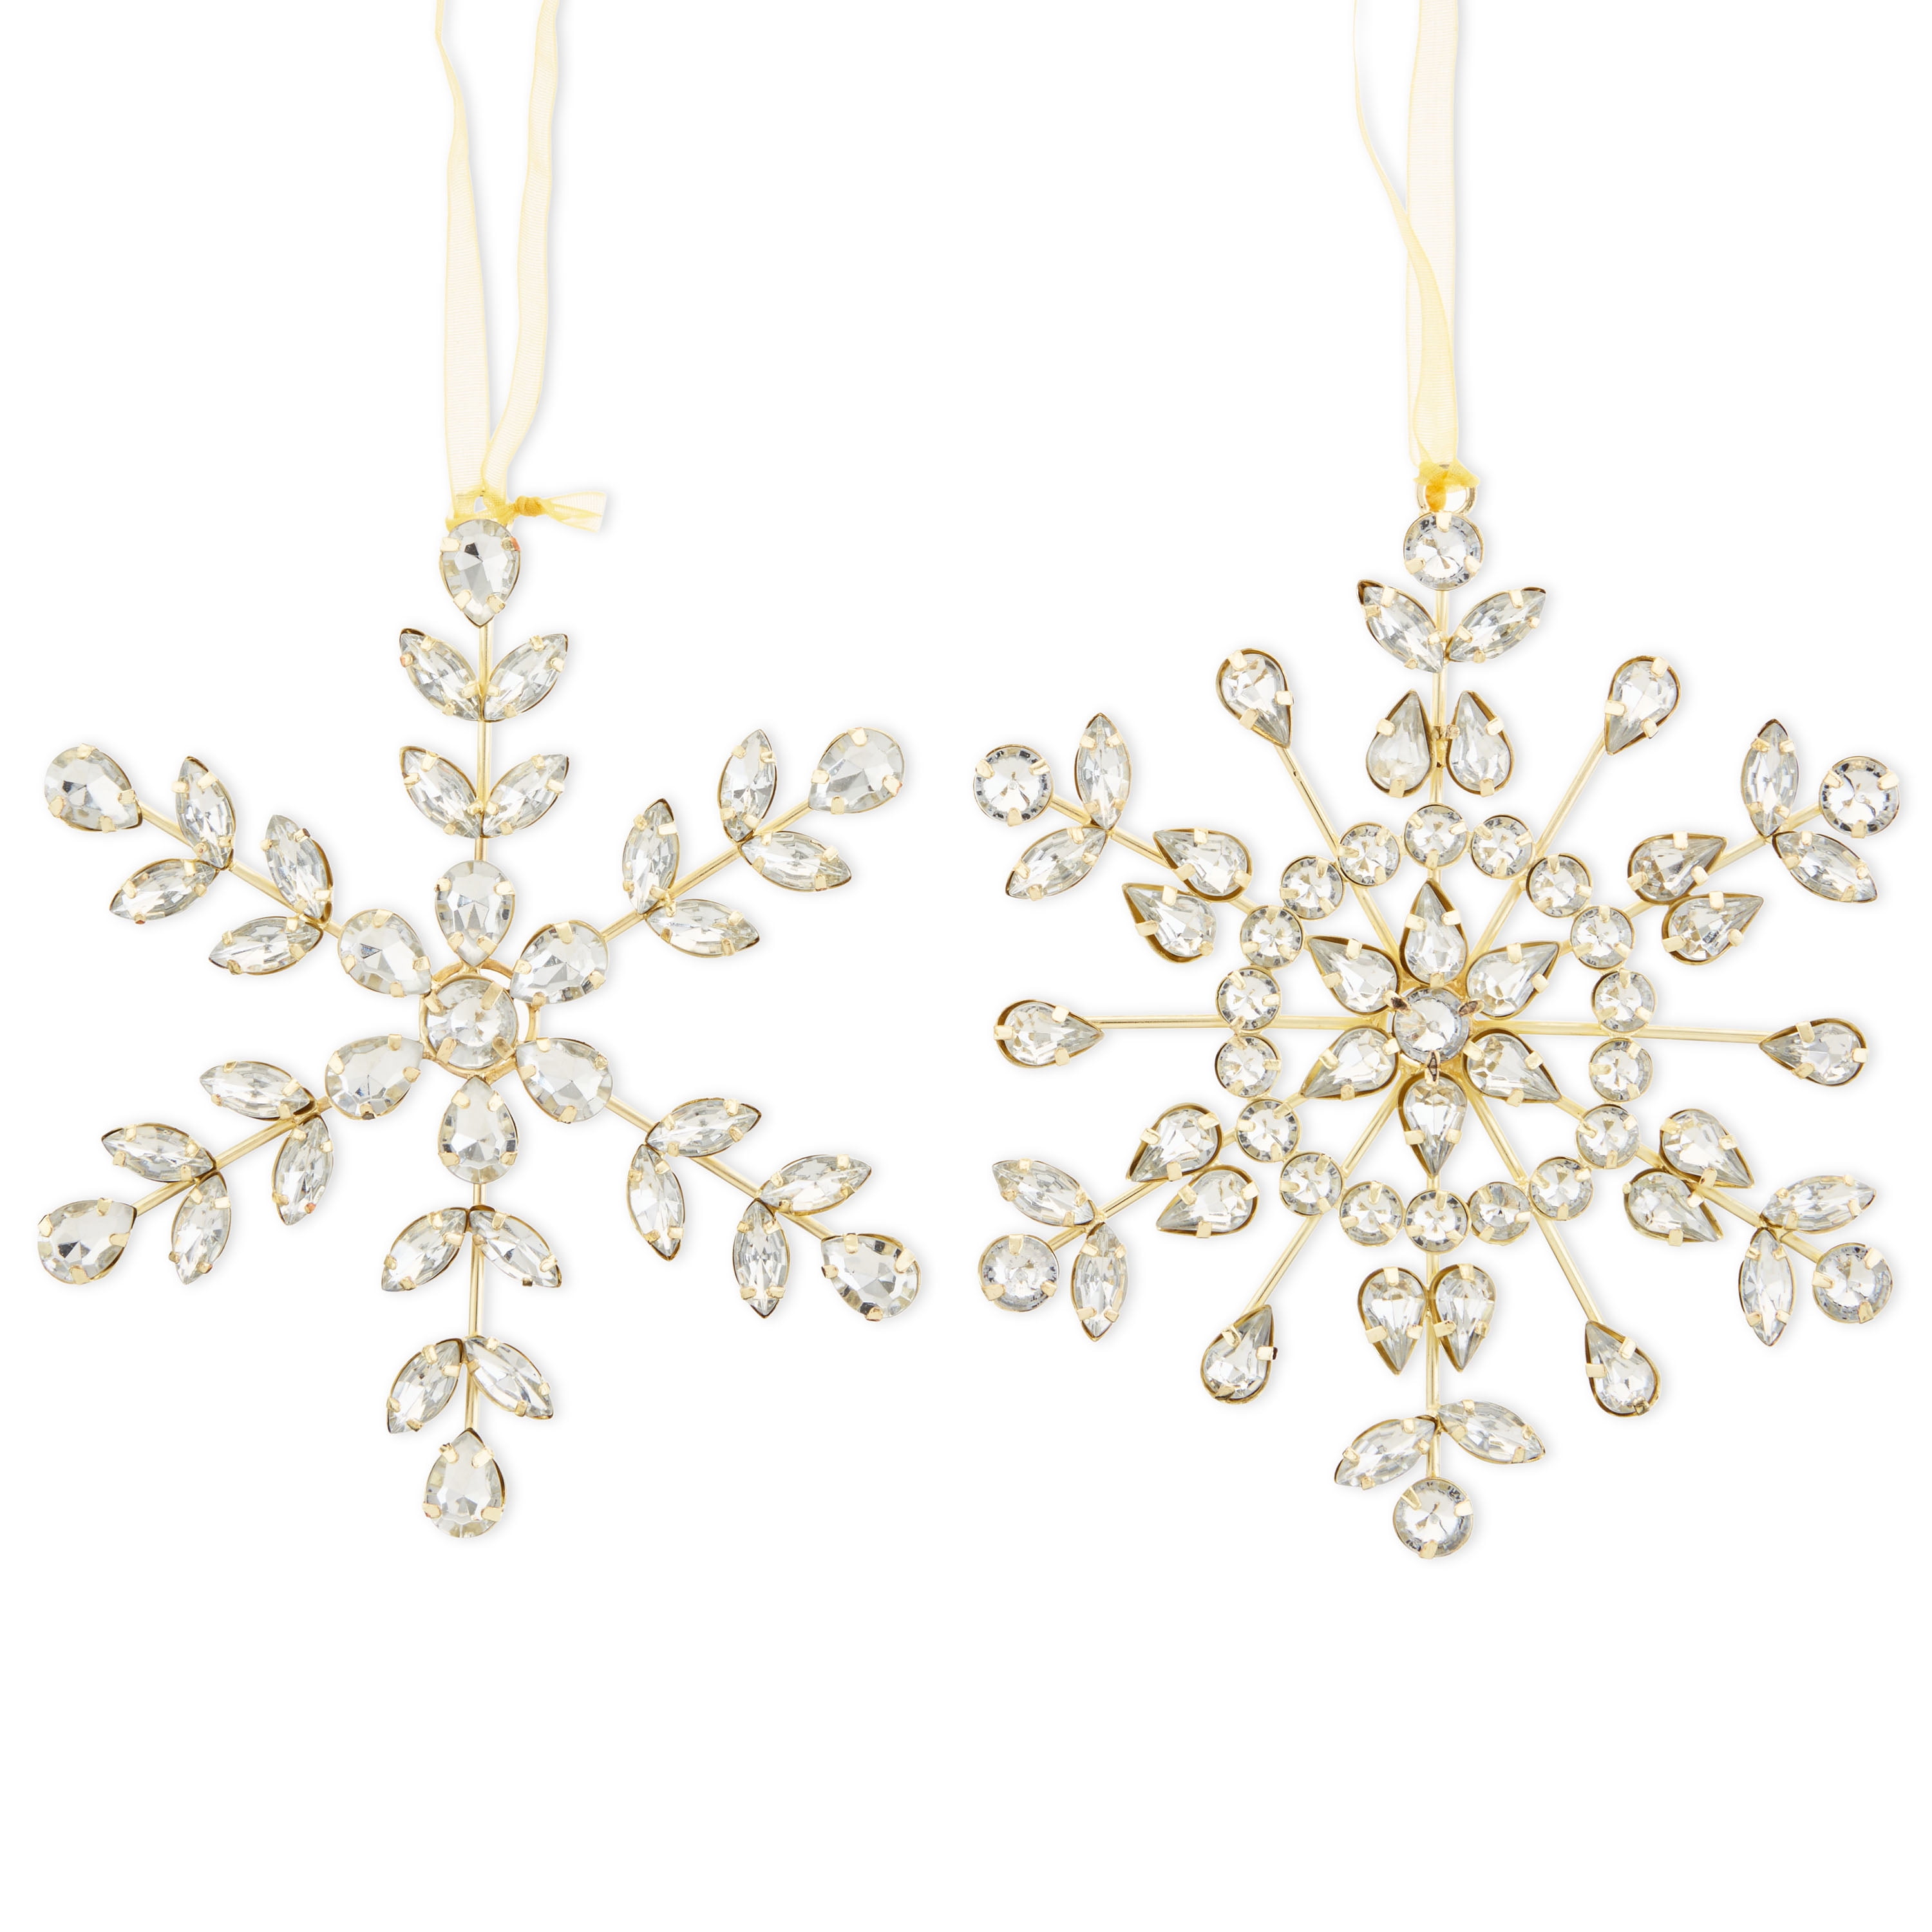 HRSC Exclusive Golden Snowflake Buttons with Clear Crystal Accent